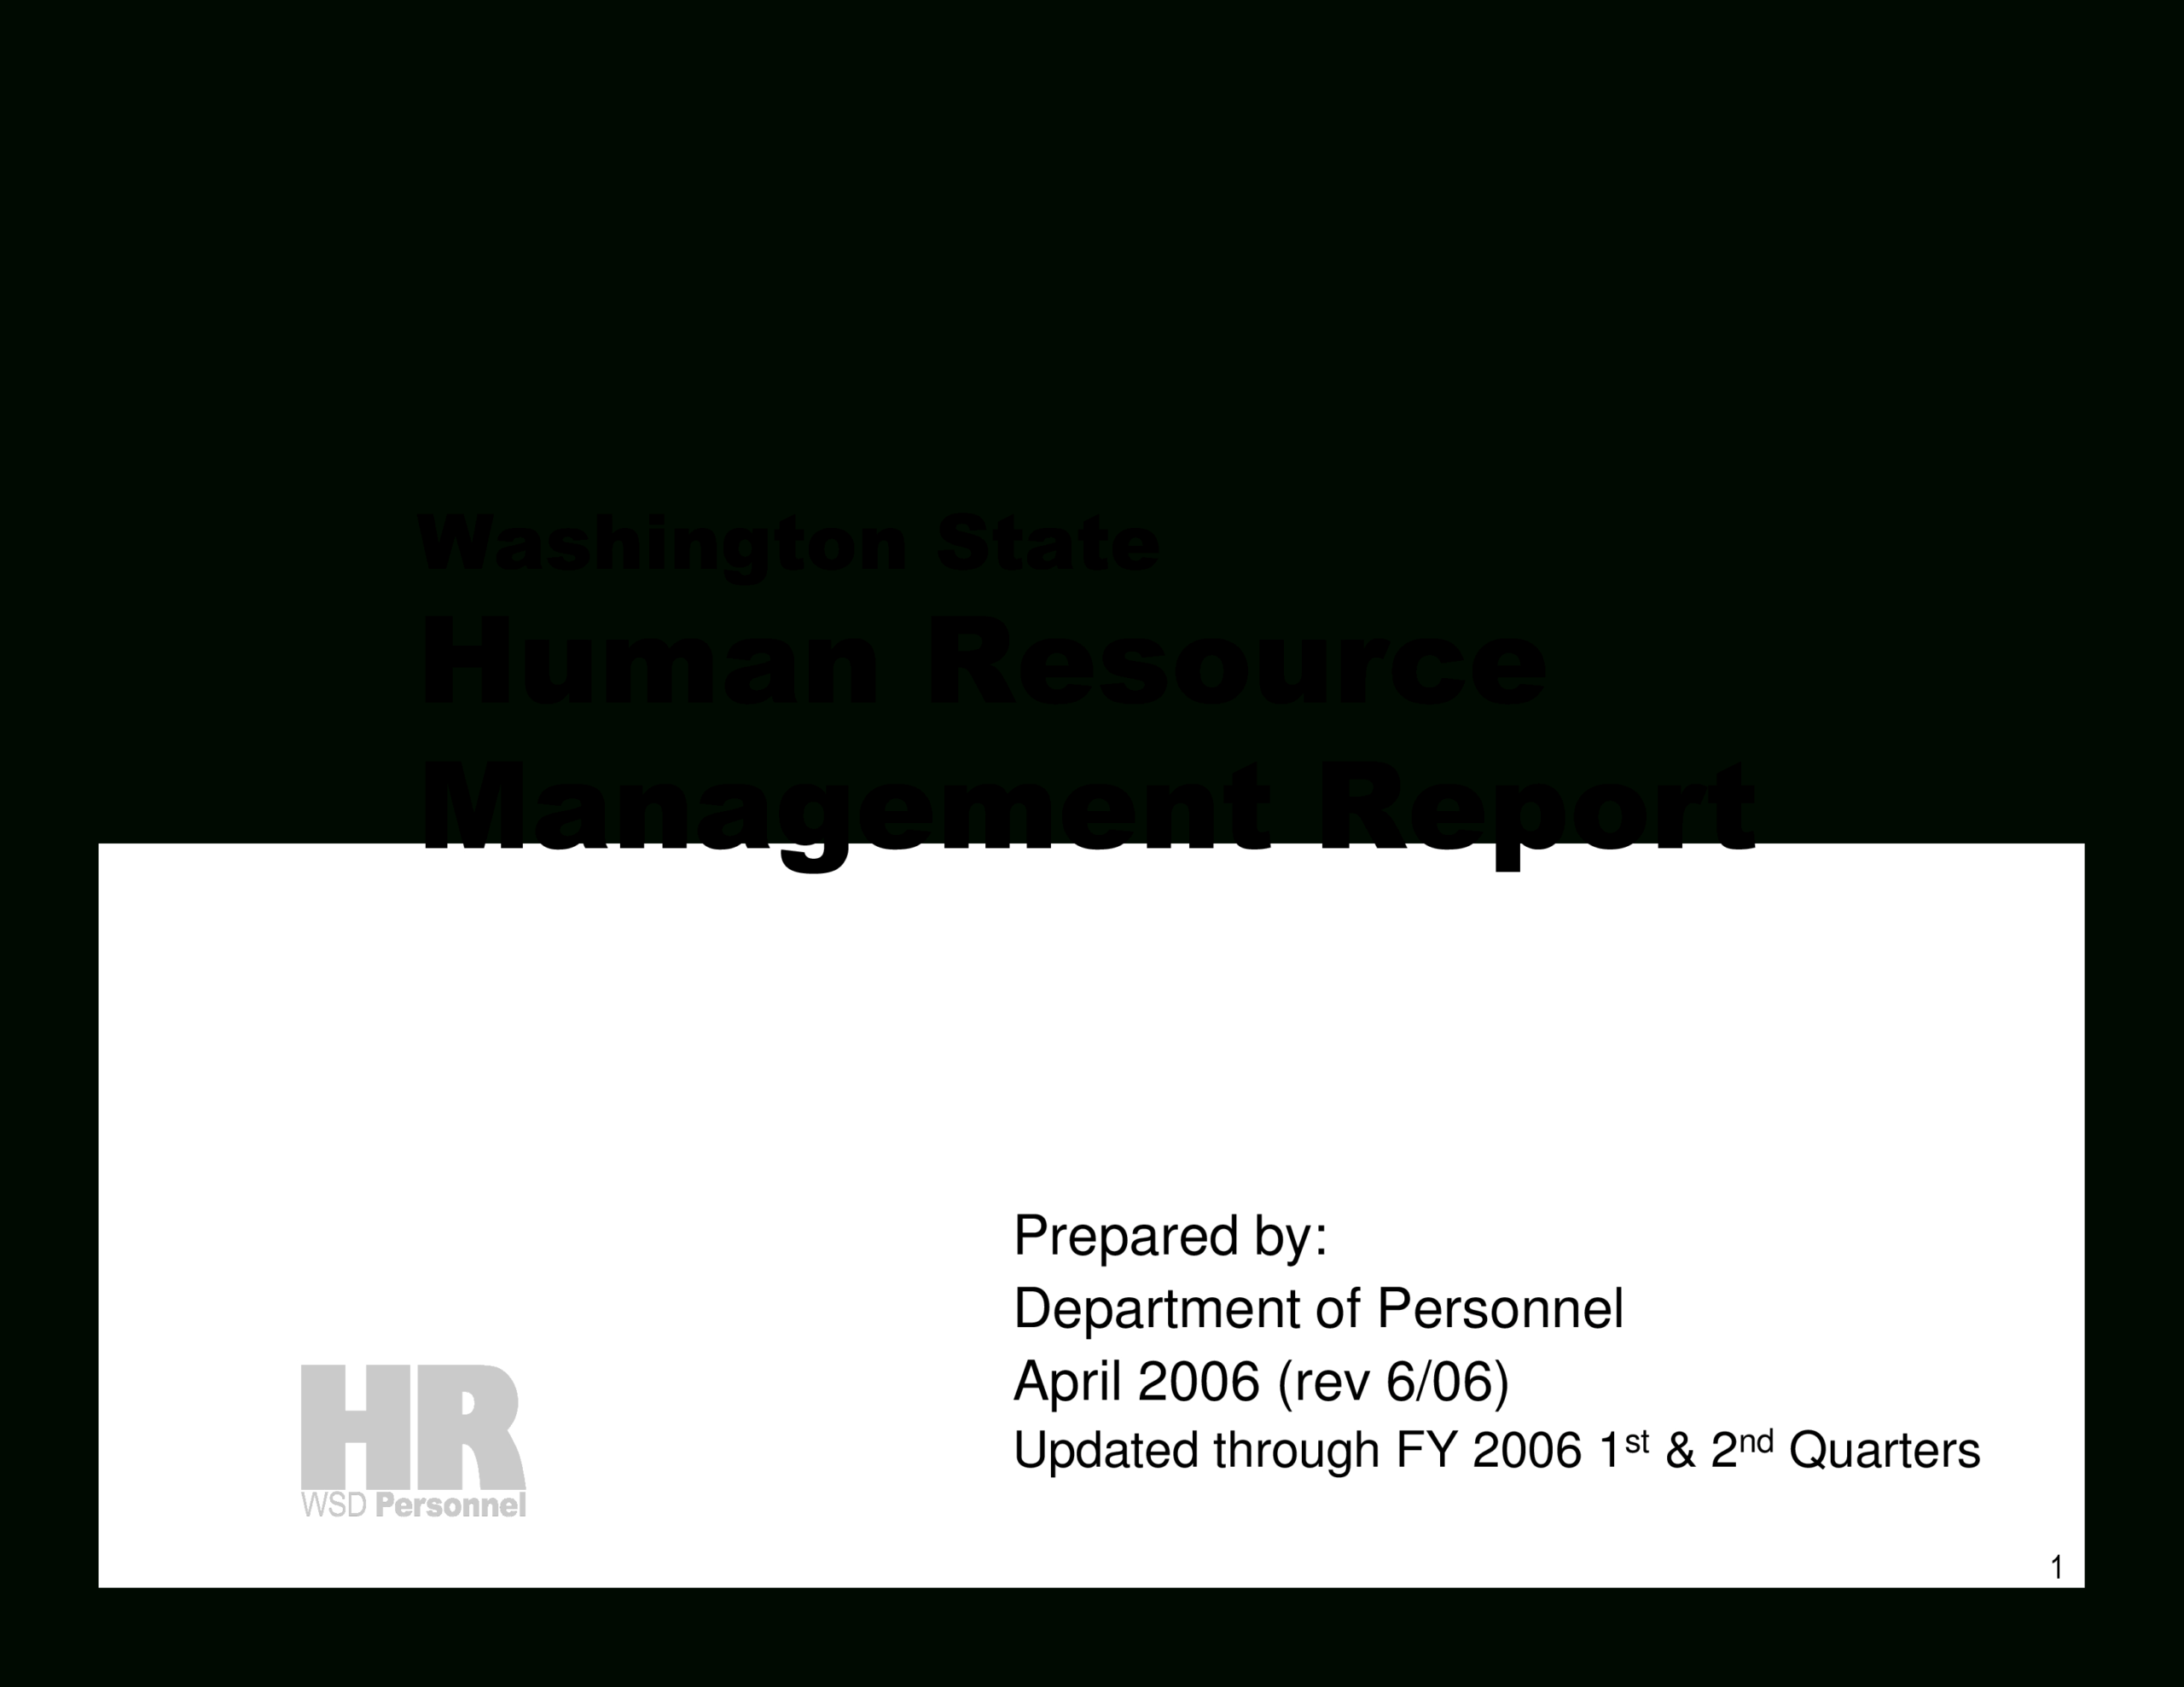 Hr Management Report | Templates At Allbusinesstemplates Throughout Hr Management Report Template